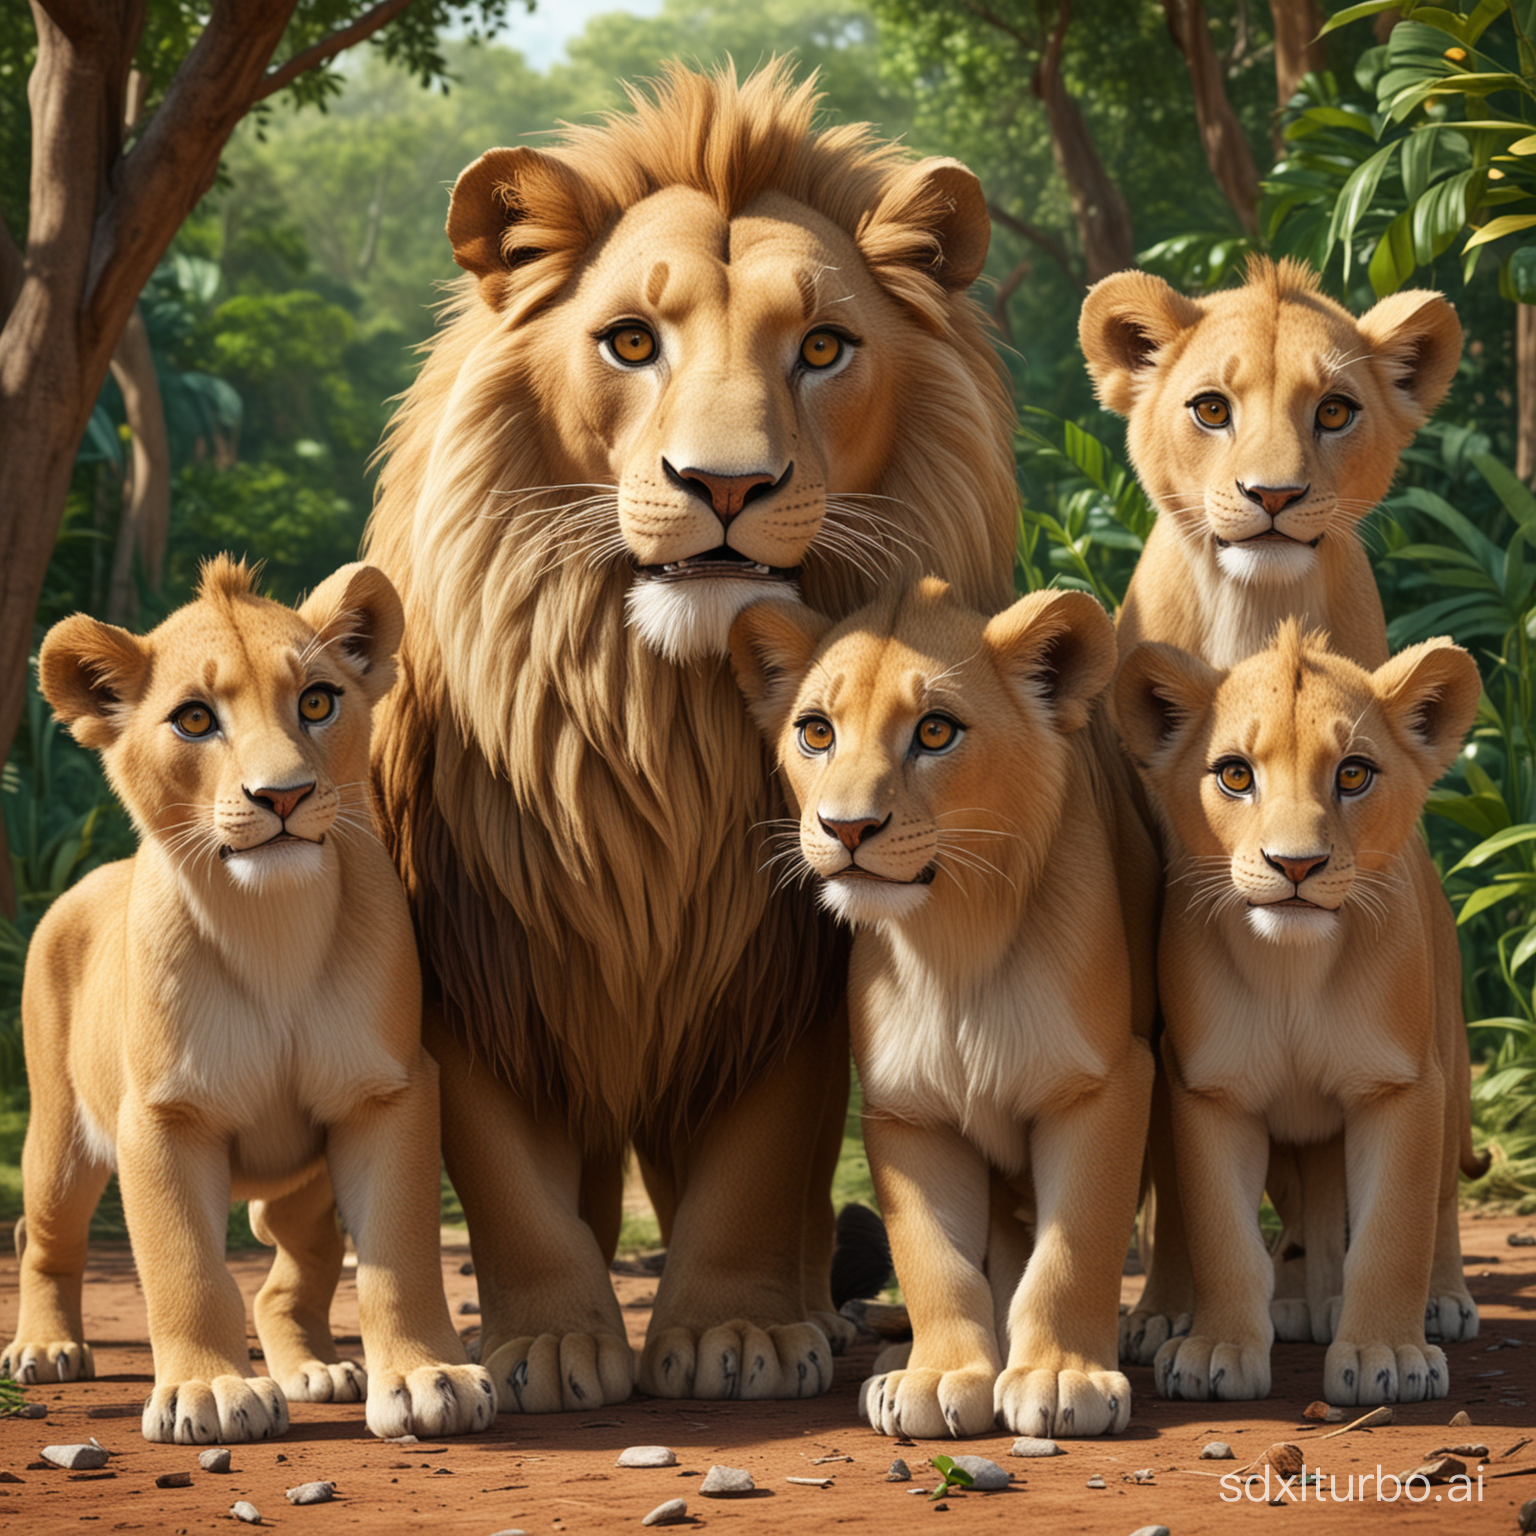 3d Madagascar old lion with his young lions in the jungle, add smily face to the young lions only not the father, lions should eat some fresh ghazal meat
